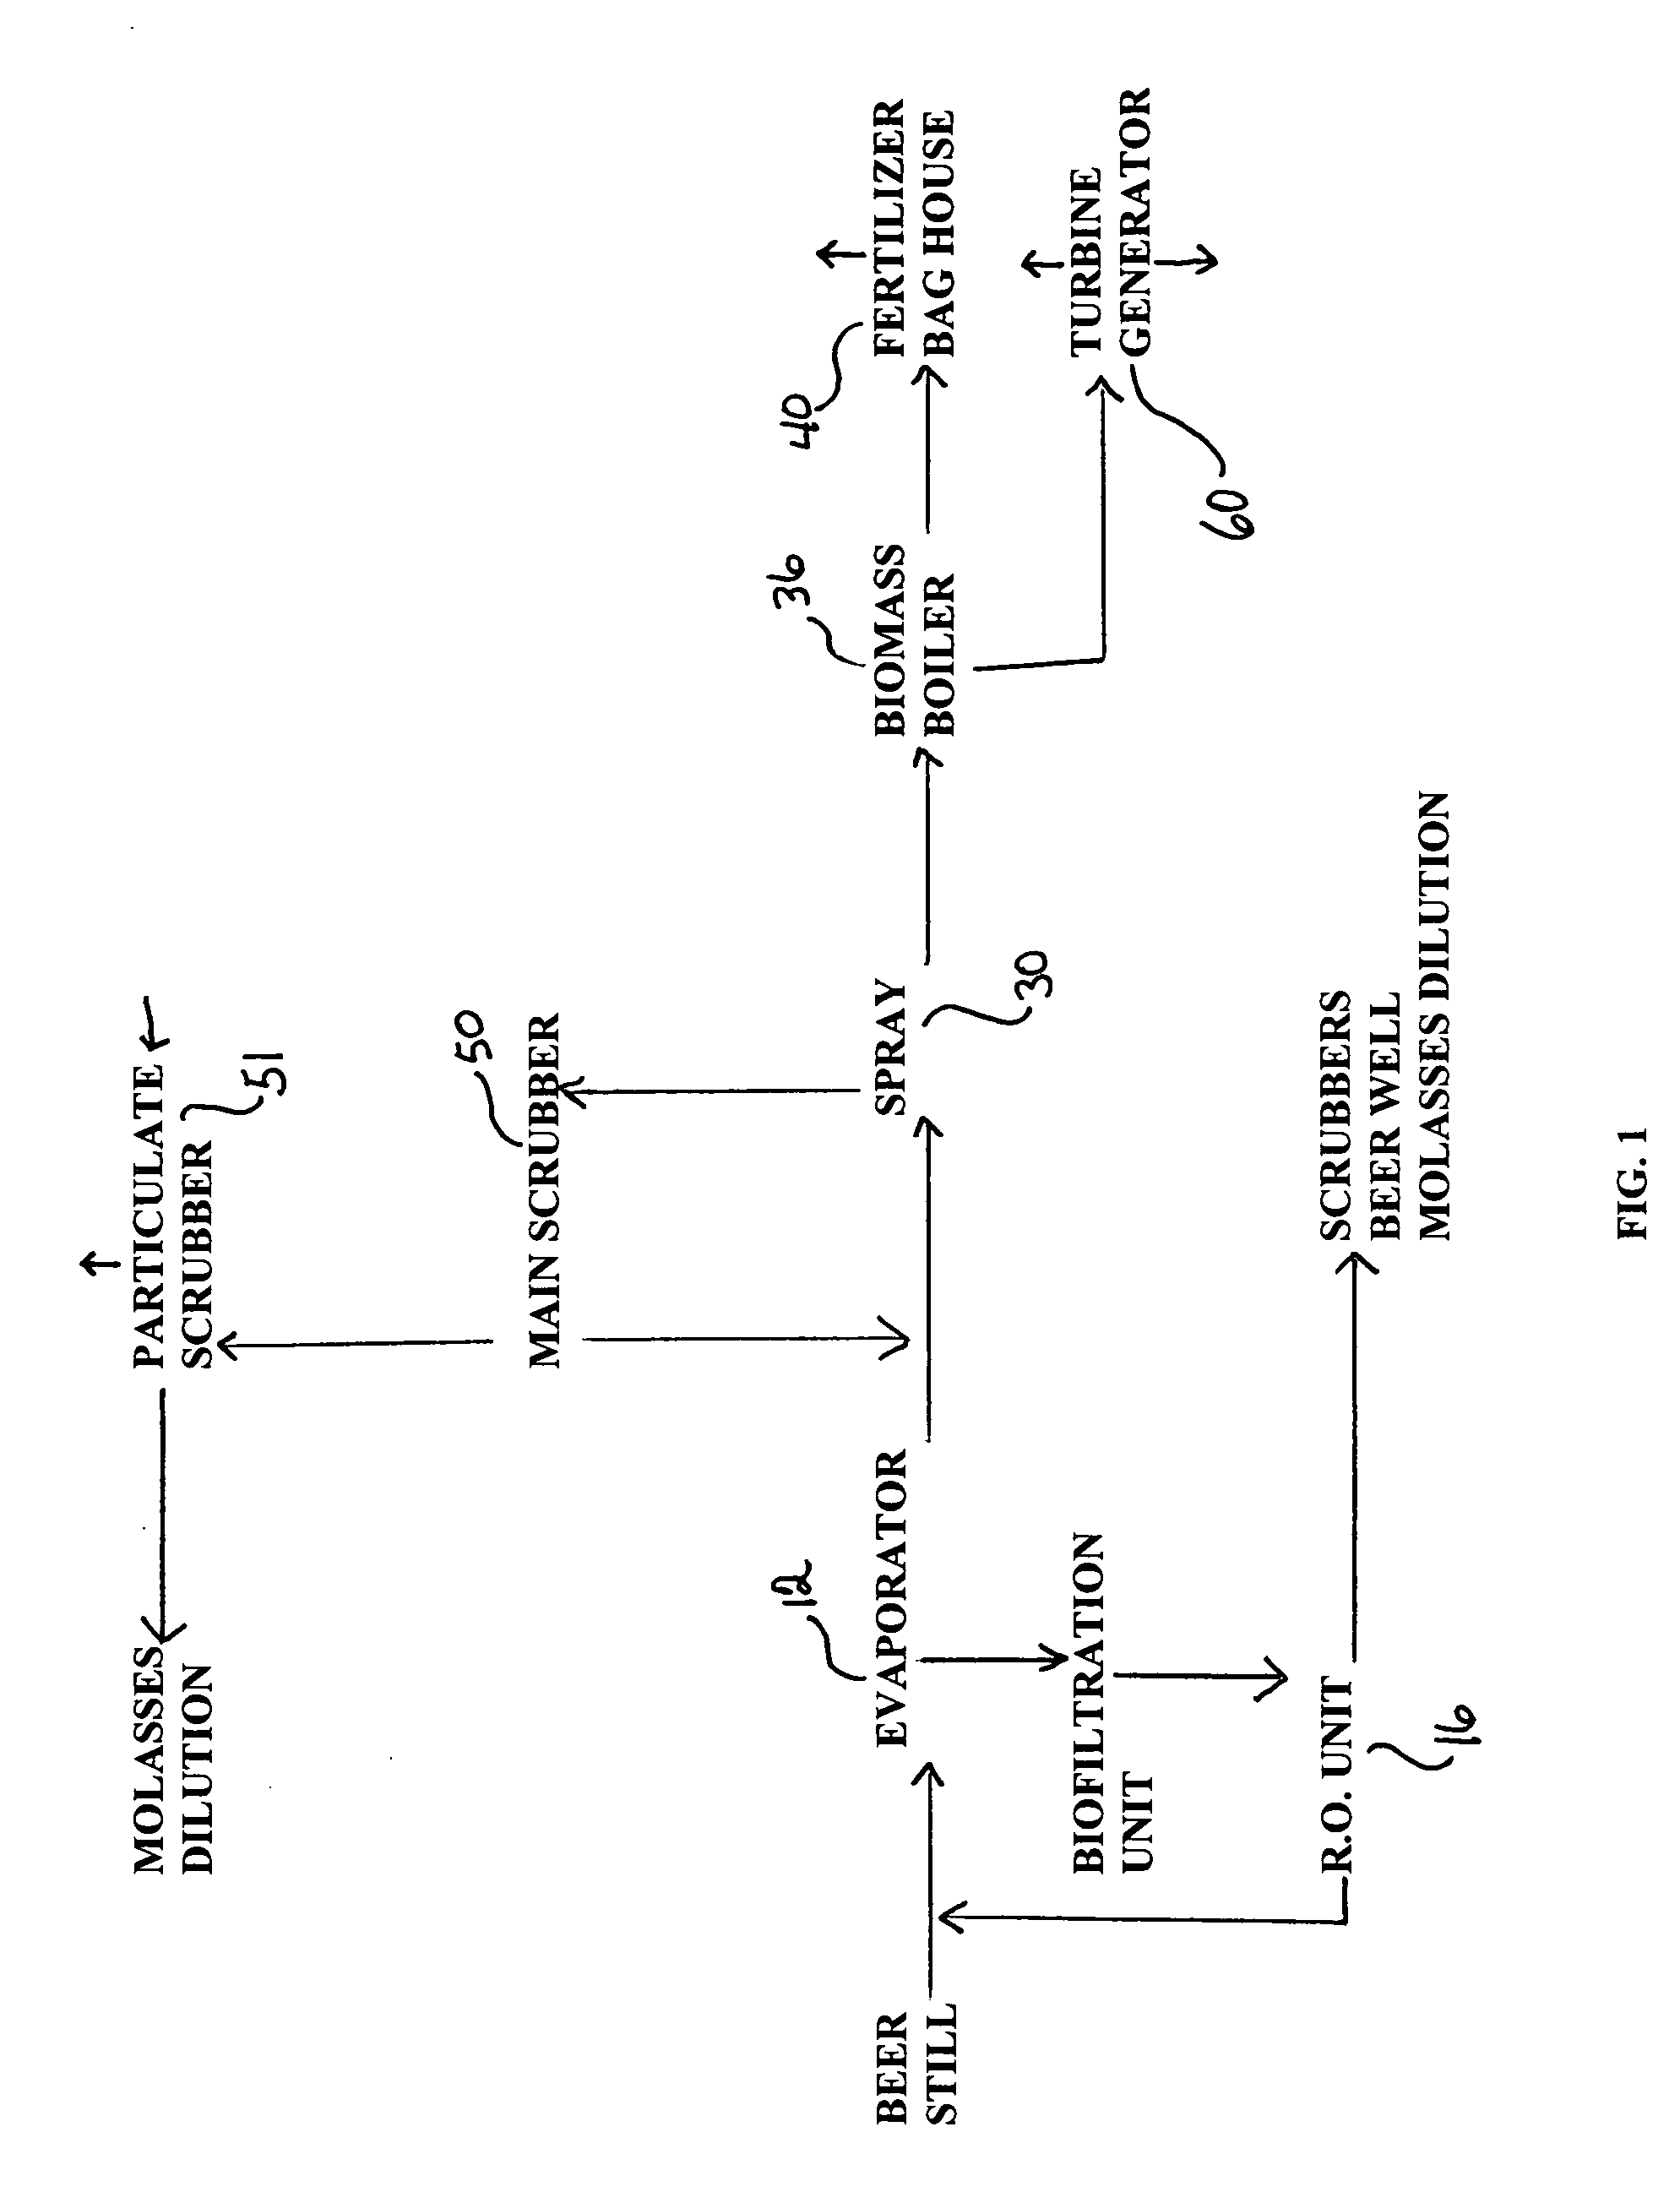 Process and apparatus for reusing energy recovered in alcohol production